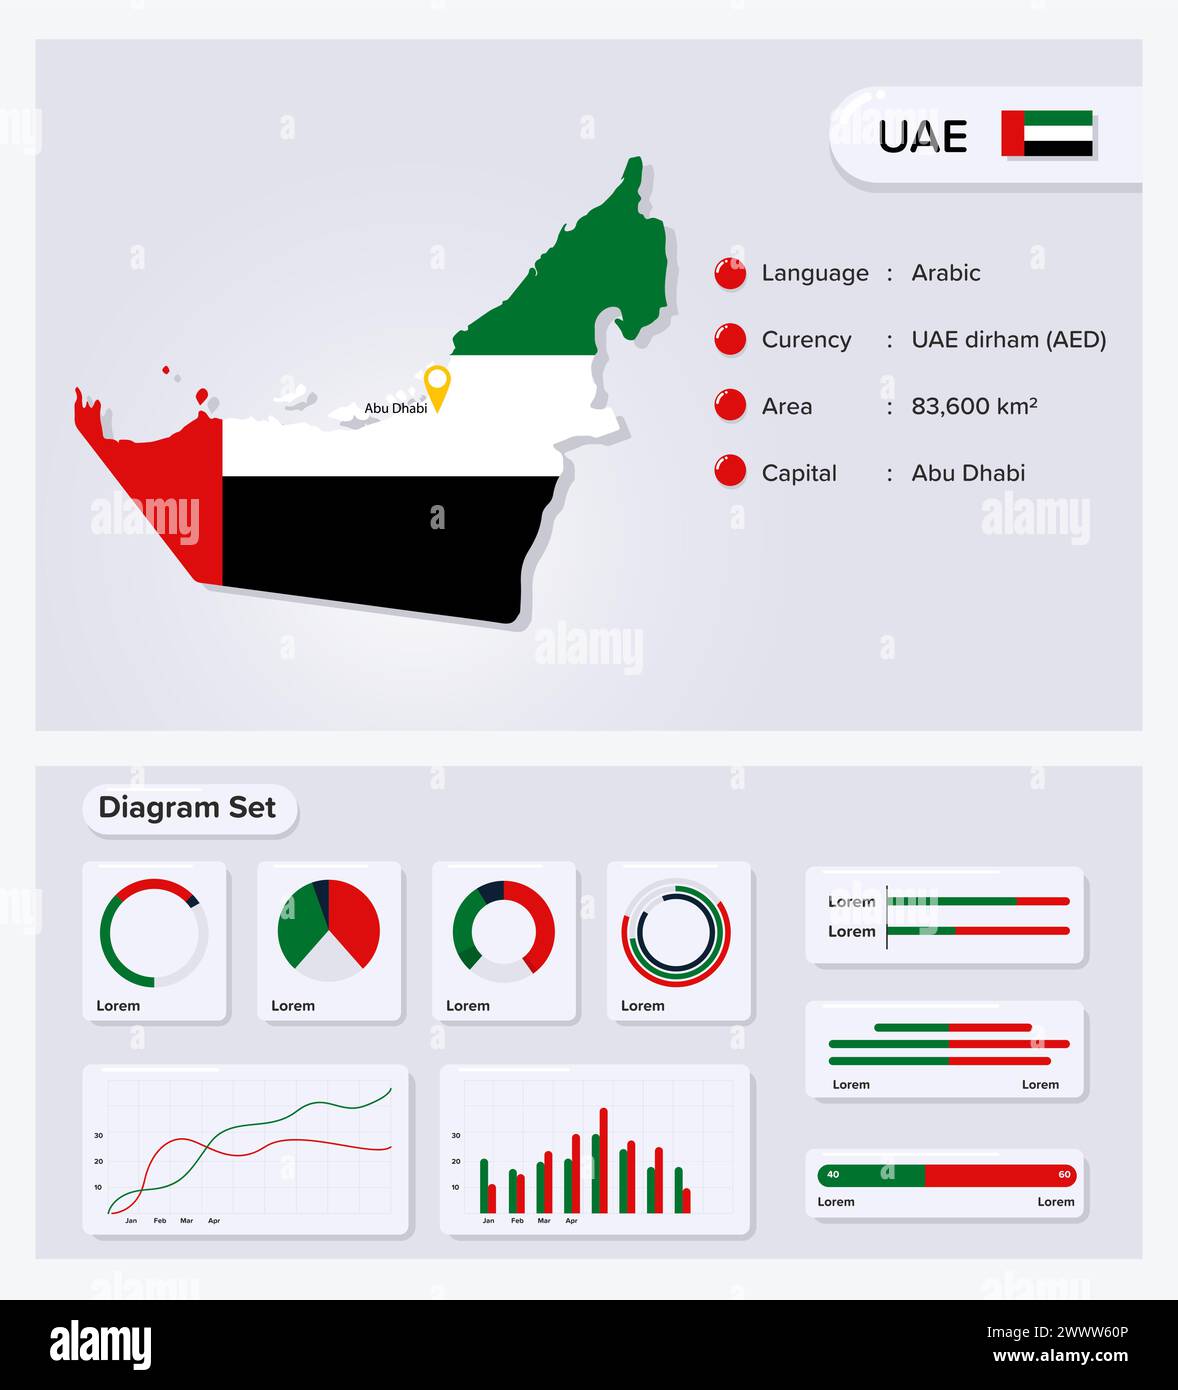 UAE Infographic Vector Illustration, Emirate Arab Statistical Data Element, Information Board With Flag Map, UAE Map Flag With Diagram Set Flat Design Stock Vector